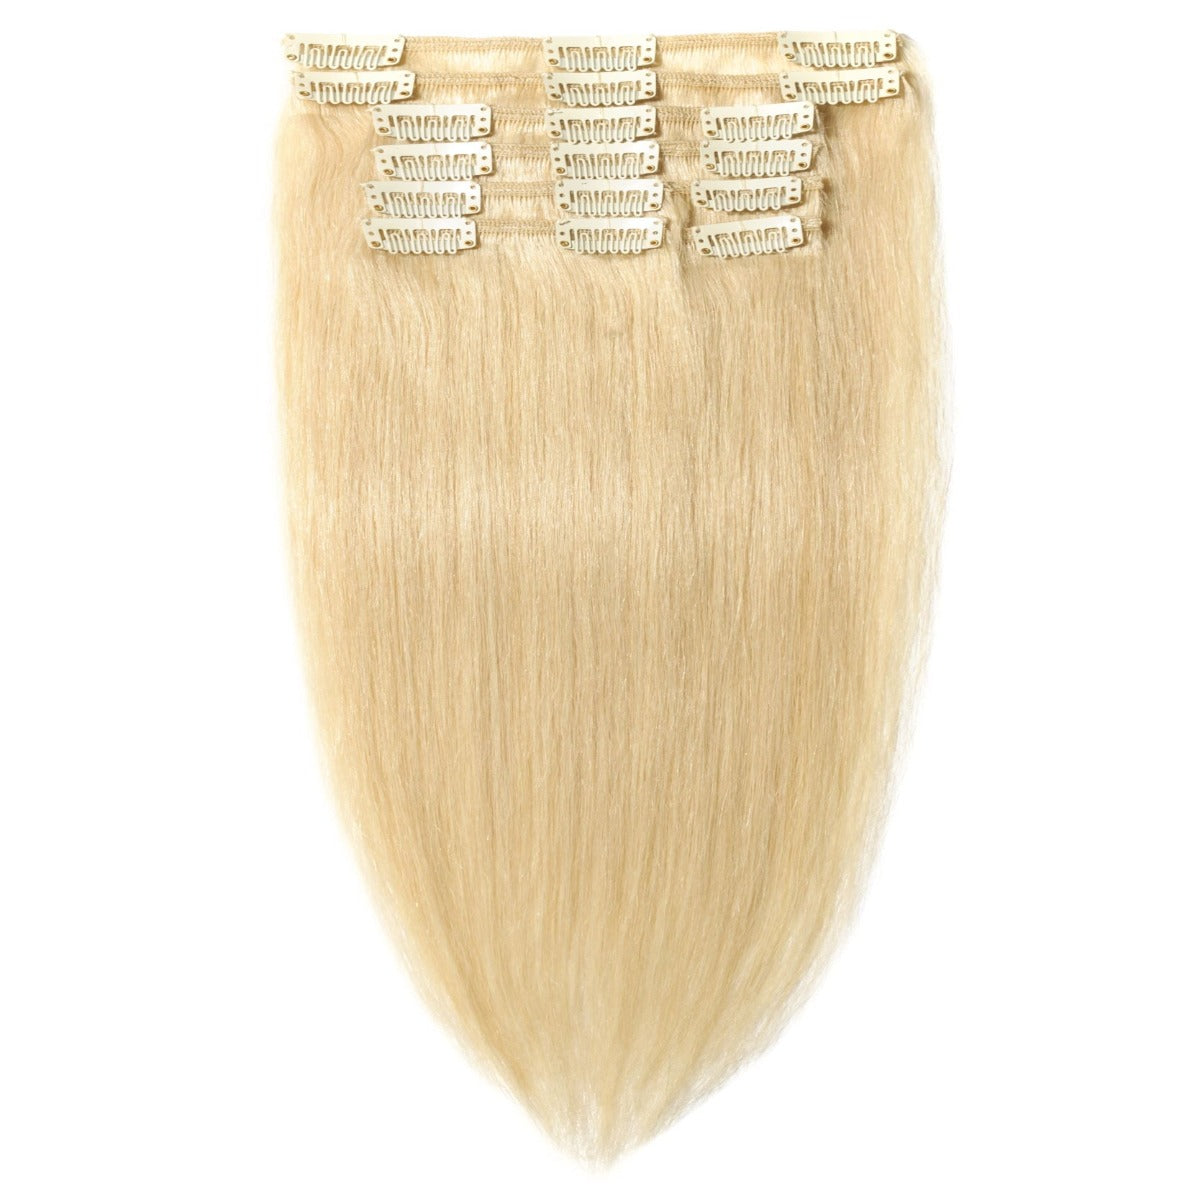 CLIP-IN HAIR EXTENSIONS